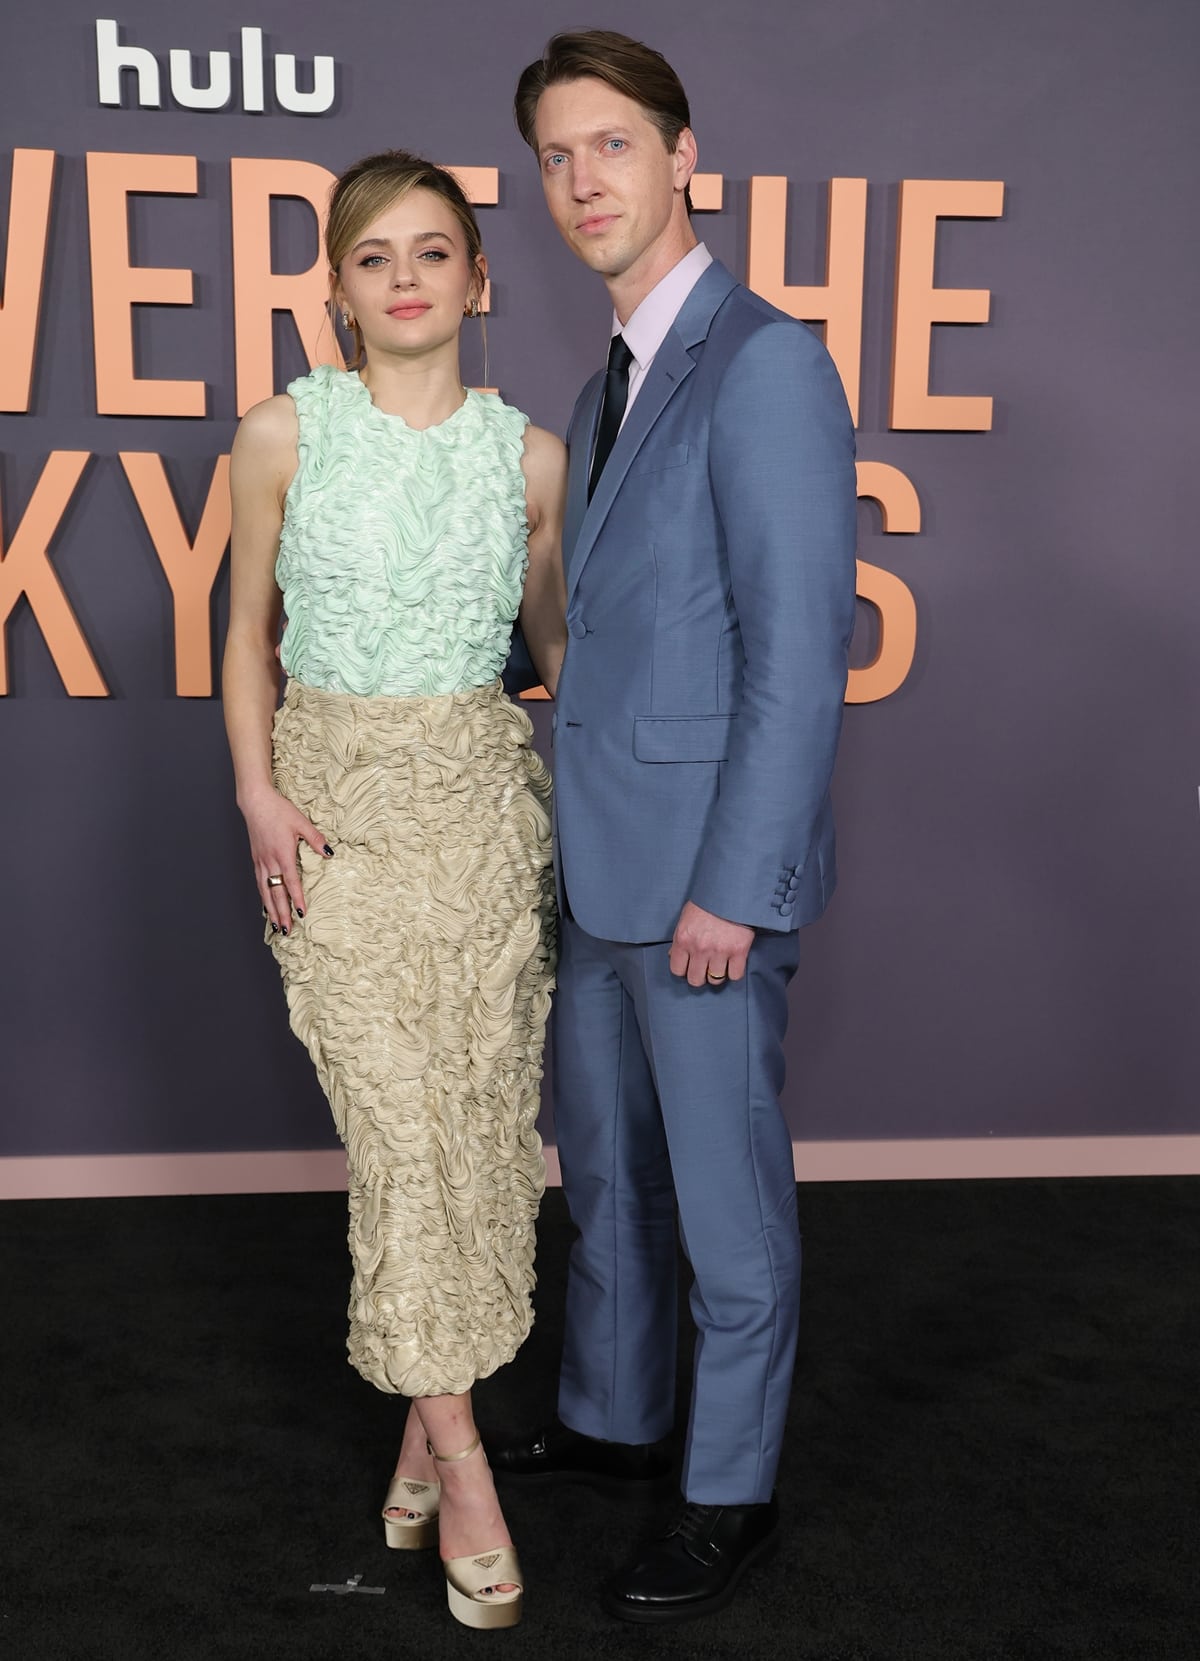 Newlyweds Joey King and Steven Piet make their red carpet debut as a married couple in coordinating chic attire, with Joey in a Prada gown and Steven in a sleek blue suit at the premiere of "We Were The Lucky Ones."